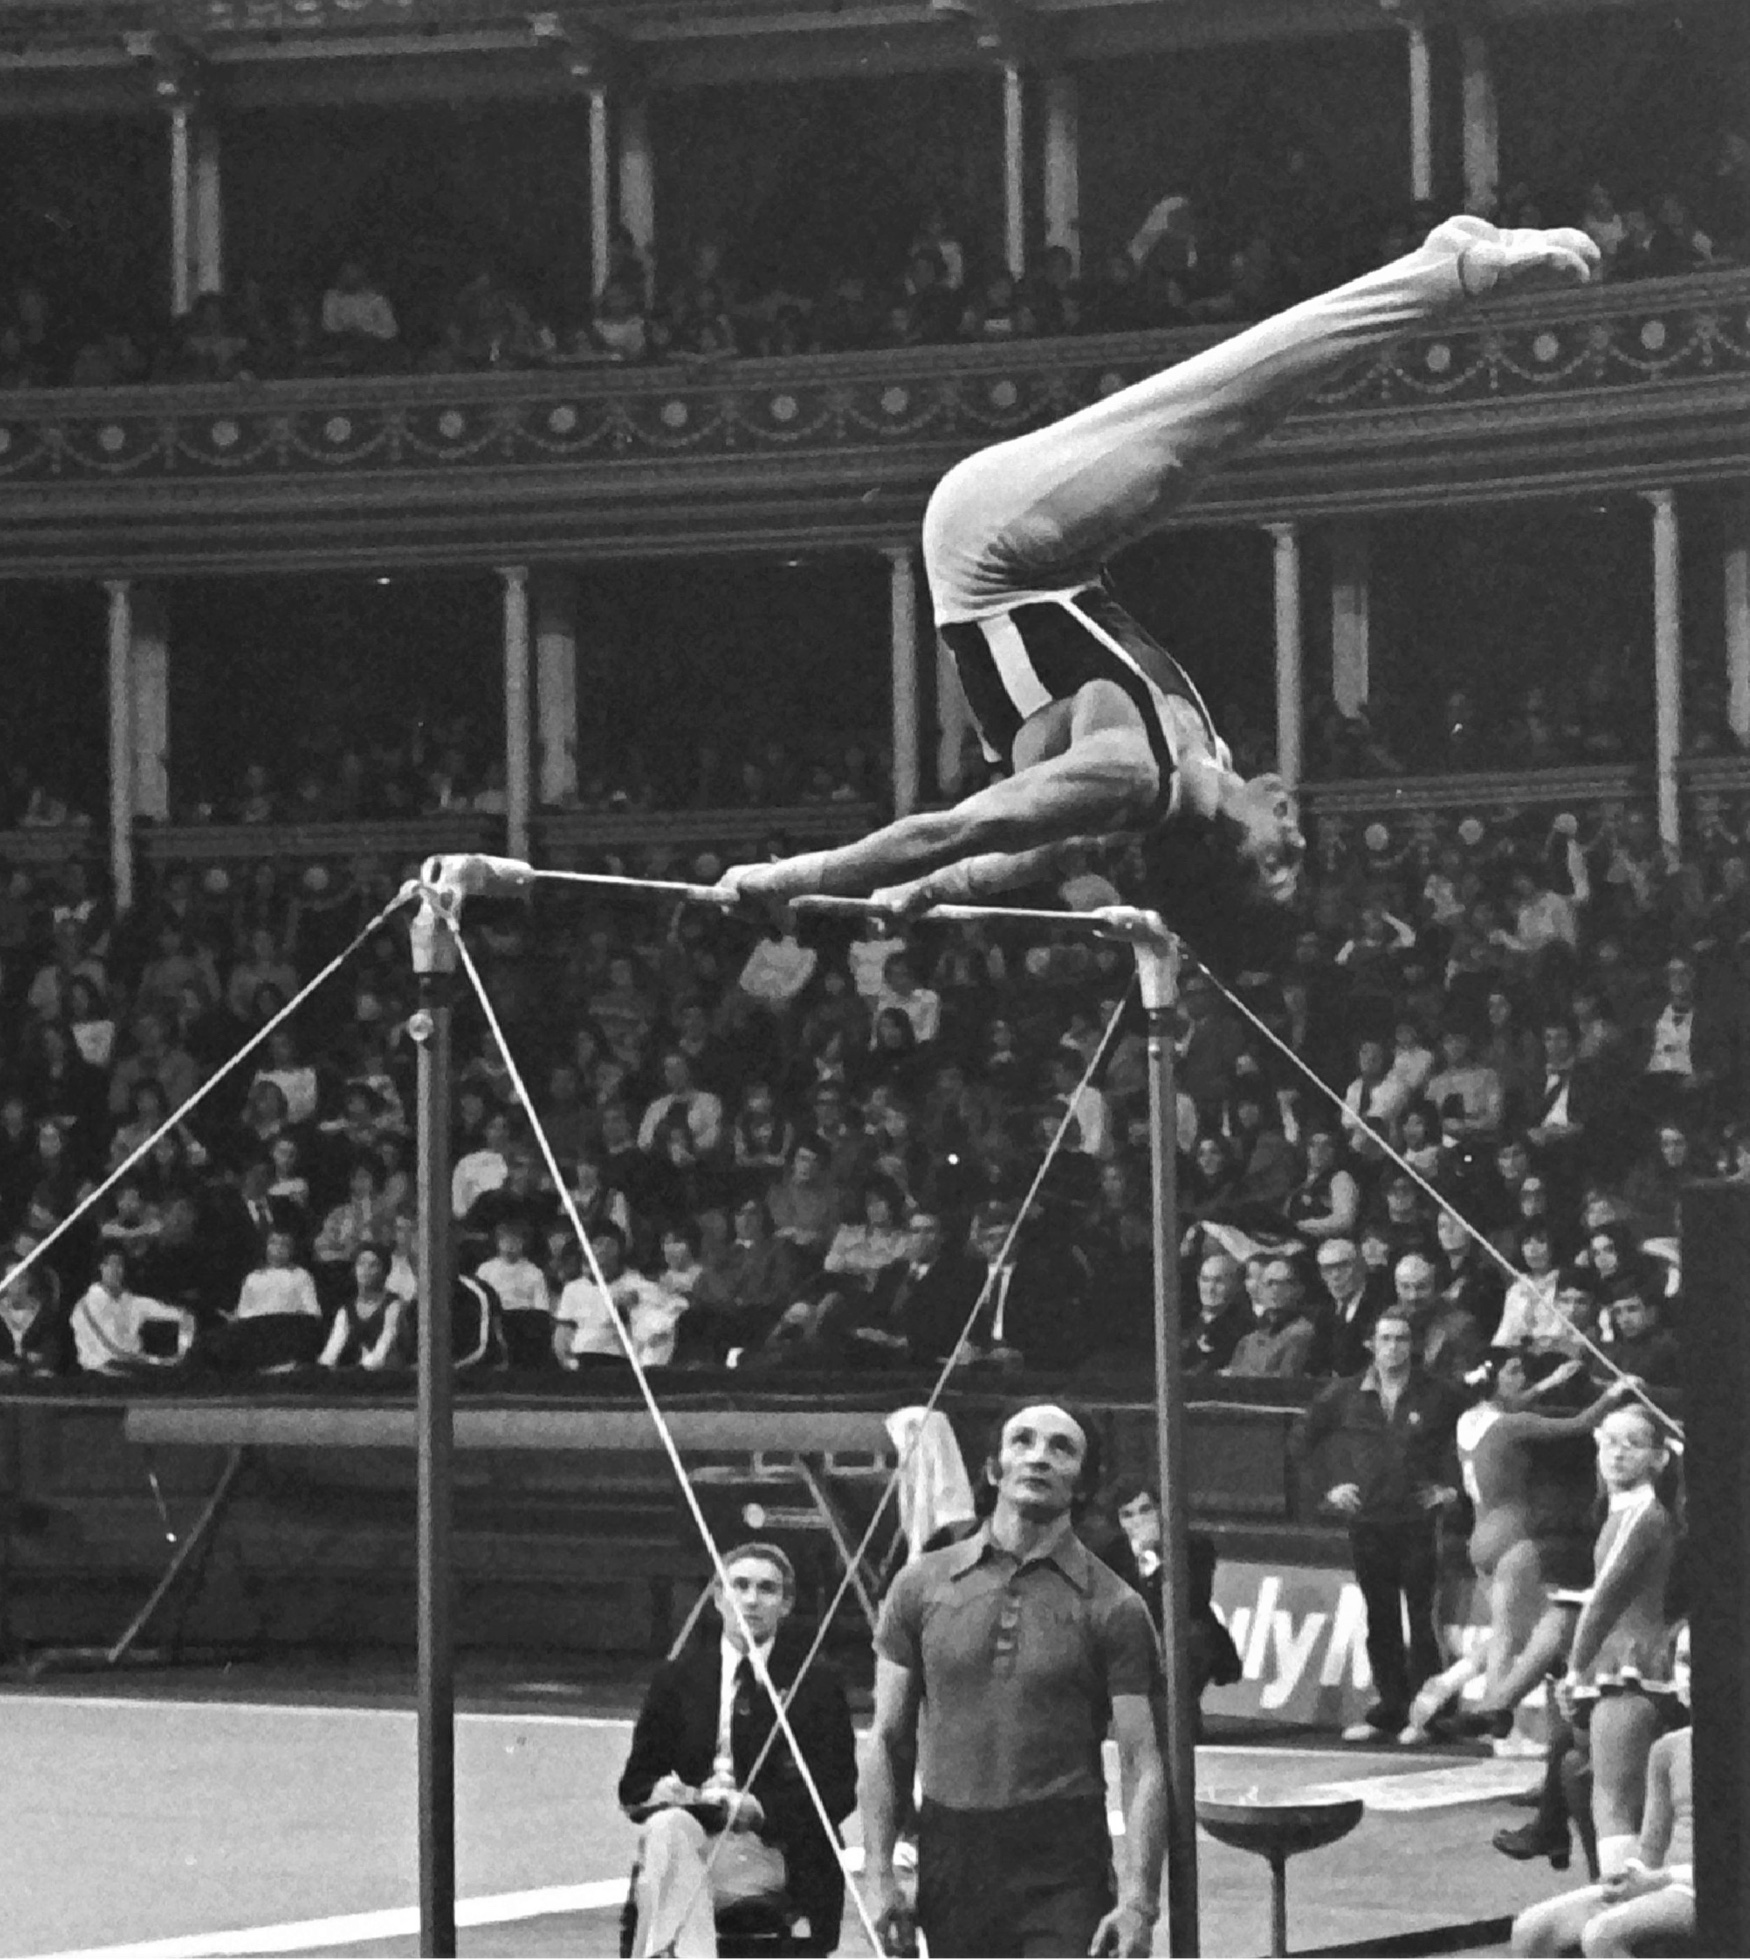 Jeff competing in the Champion’s Cup on High Bar at the Albert Hall in 1976 with coach Dick Gradley. He won this event in this year and again in 1980